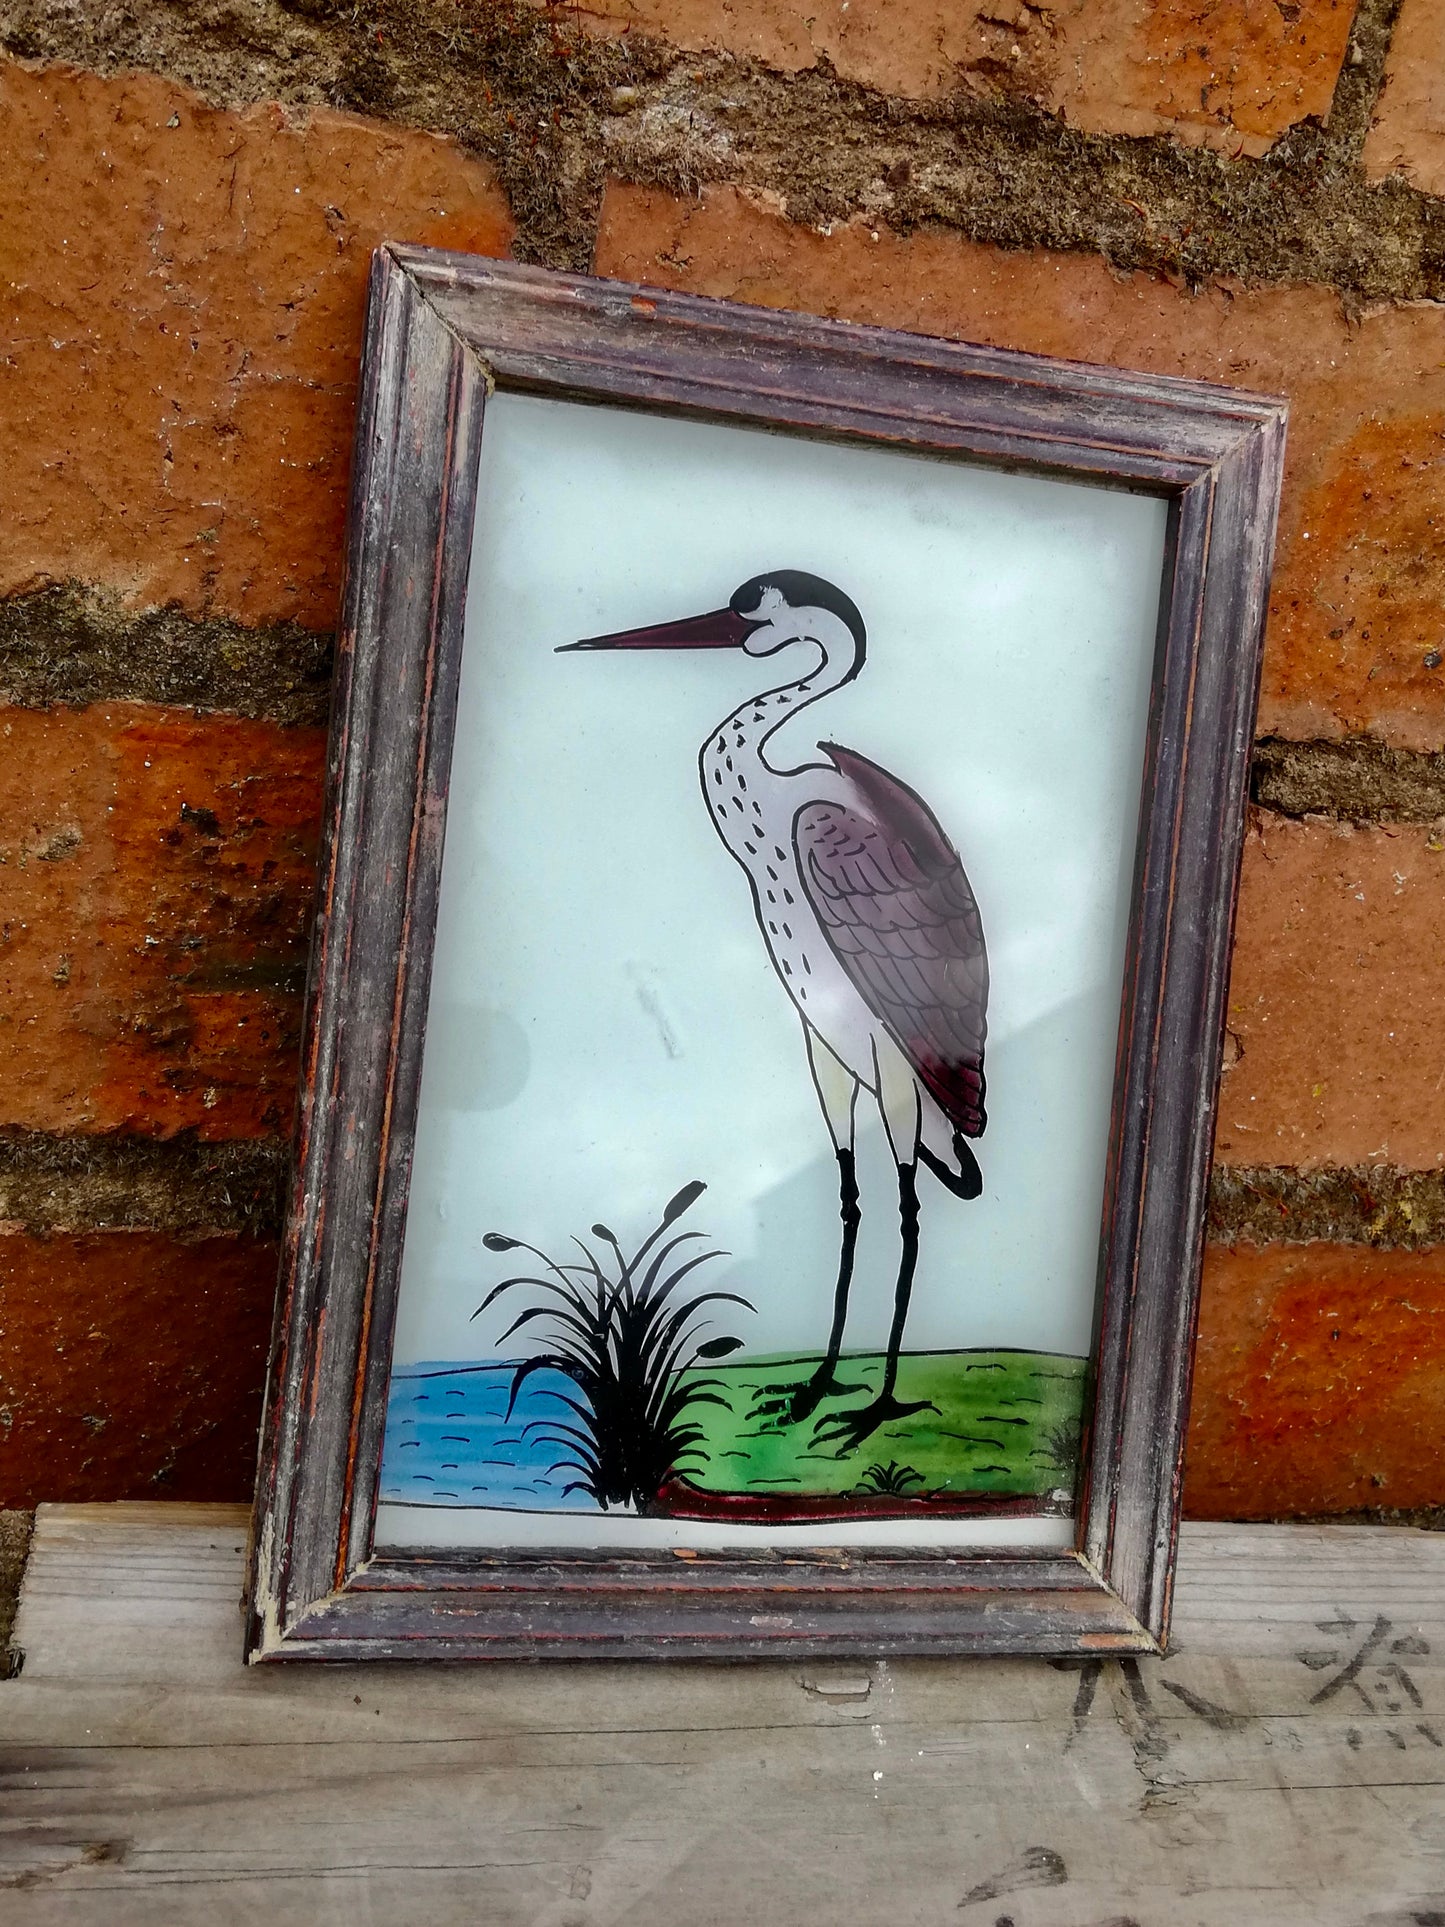 Vintage glass painting of a heron in a beautiful original frame